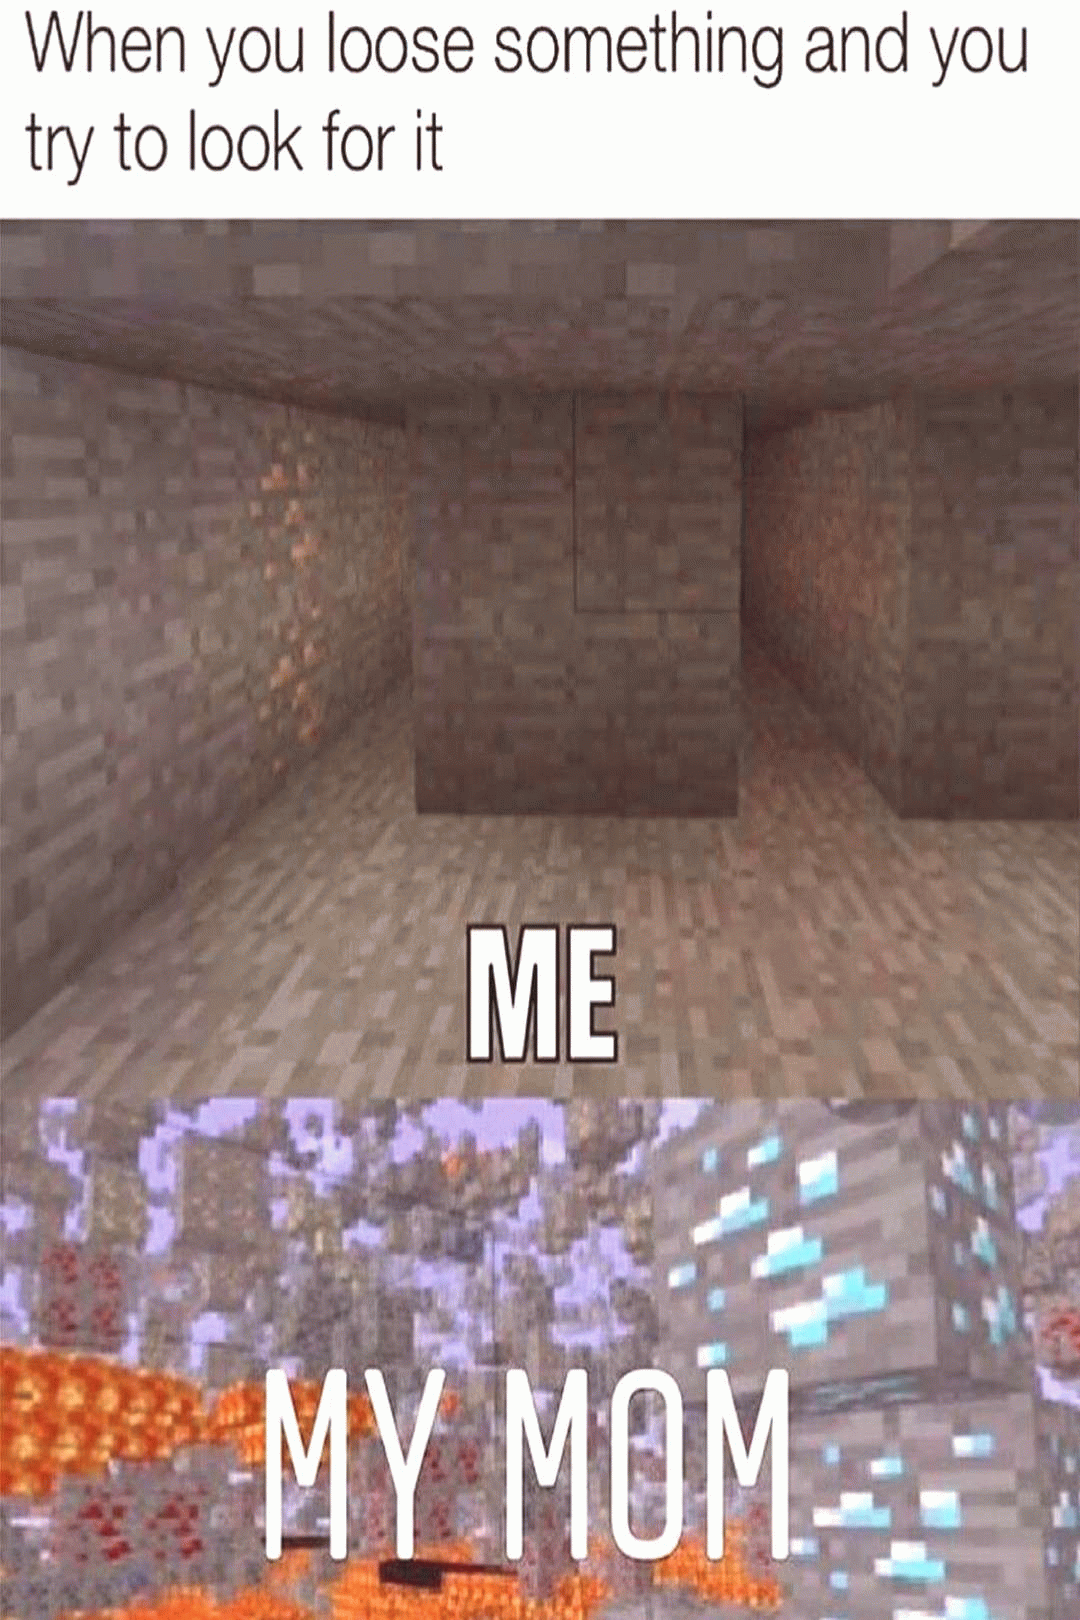 i swear moms must be hacking because they can find anything in 10 seconds repost f gaming memes minecraft funny gif tumblr medium